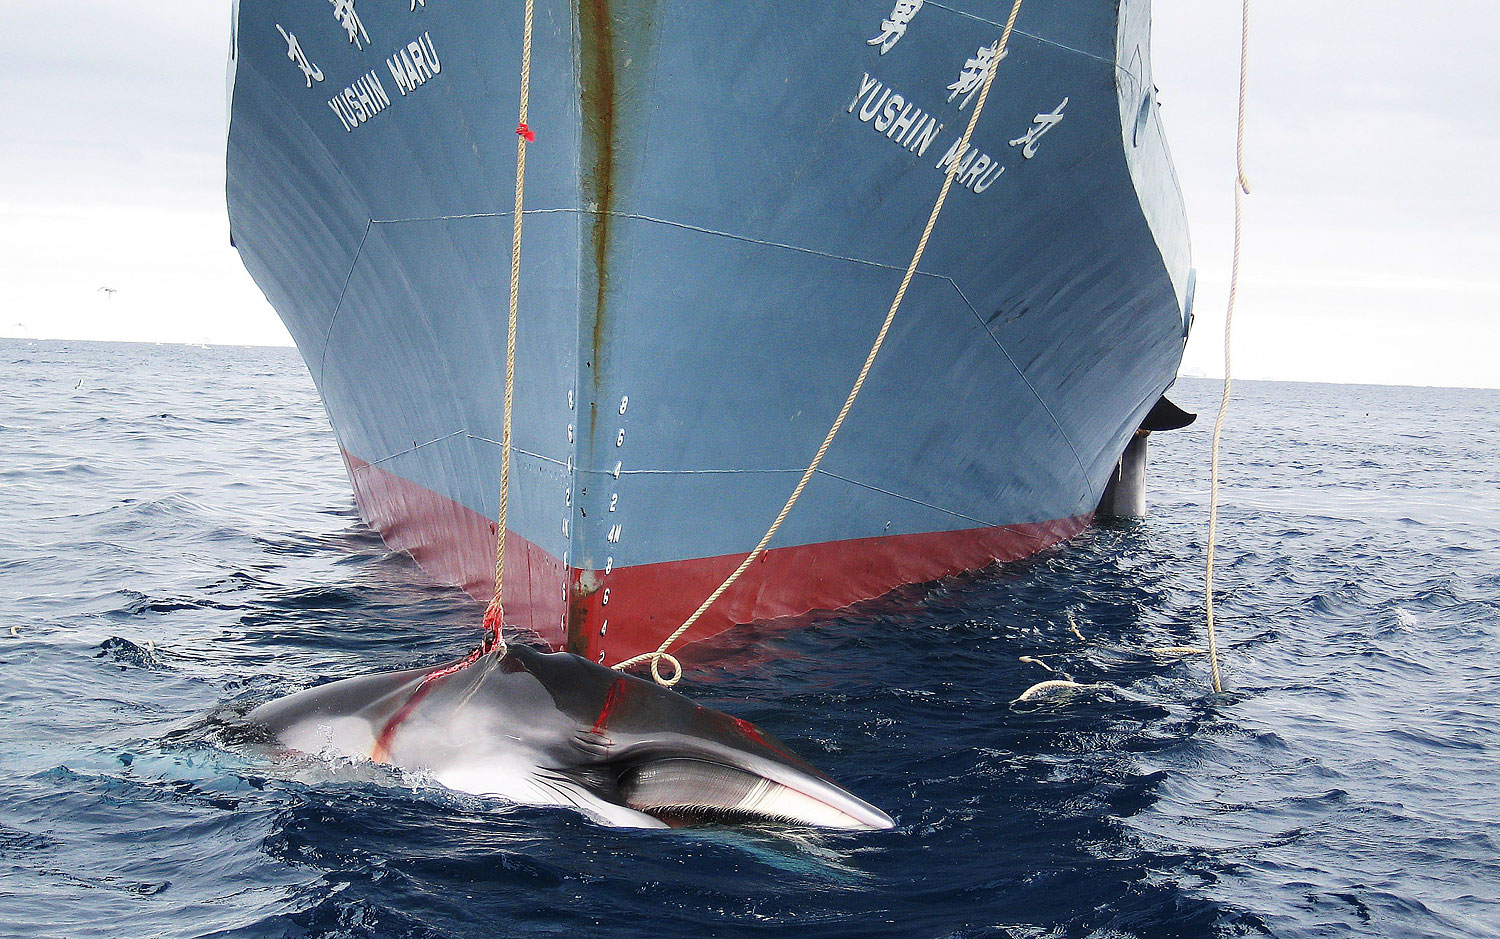 A photo released in 2008 shows a whale being dragged on board a Japanese ship after being harpooned in Antarctic waters.